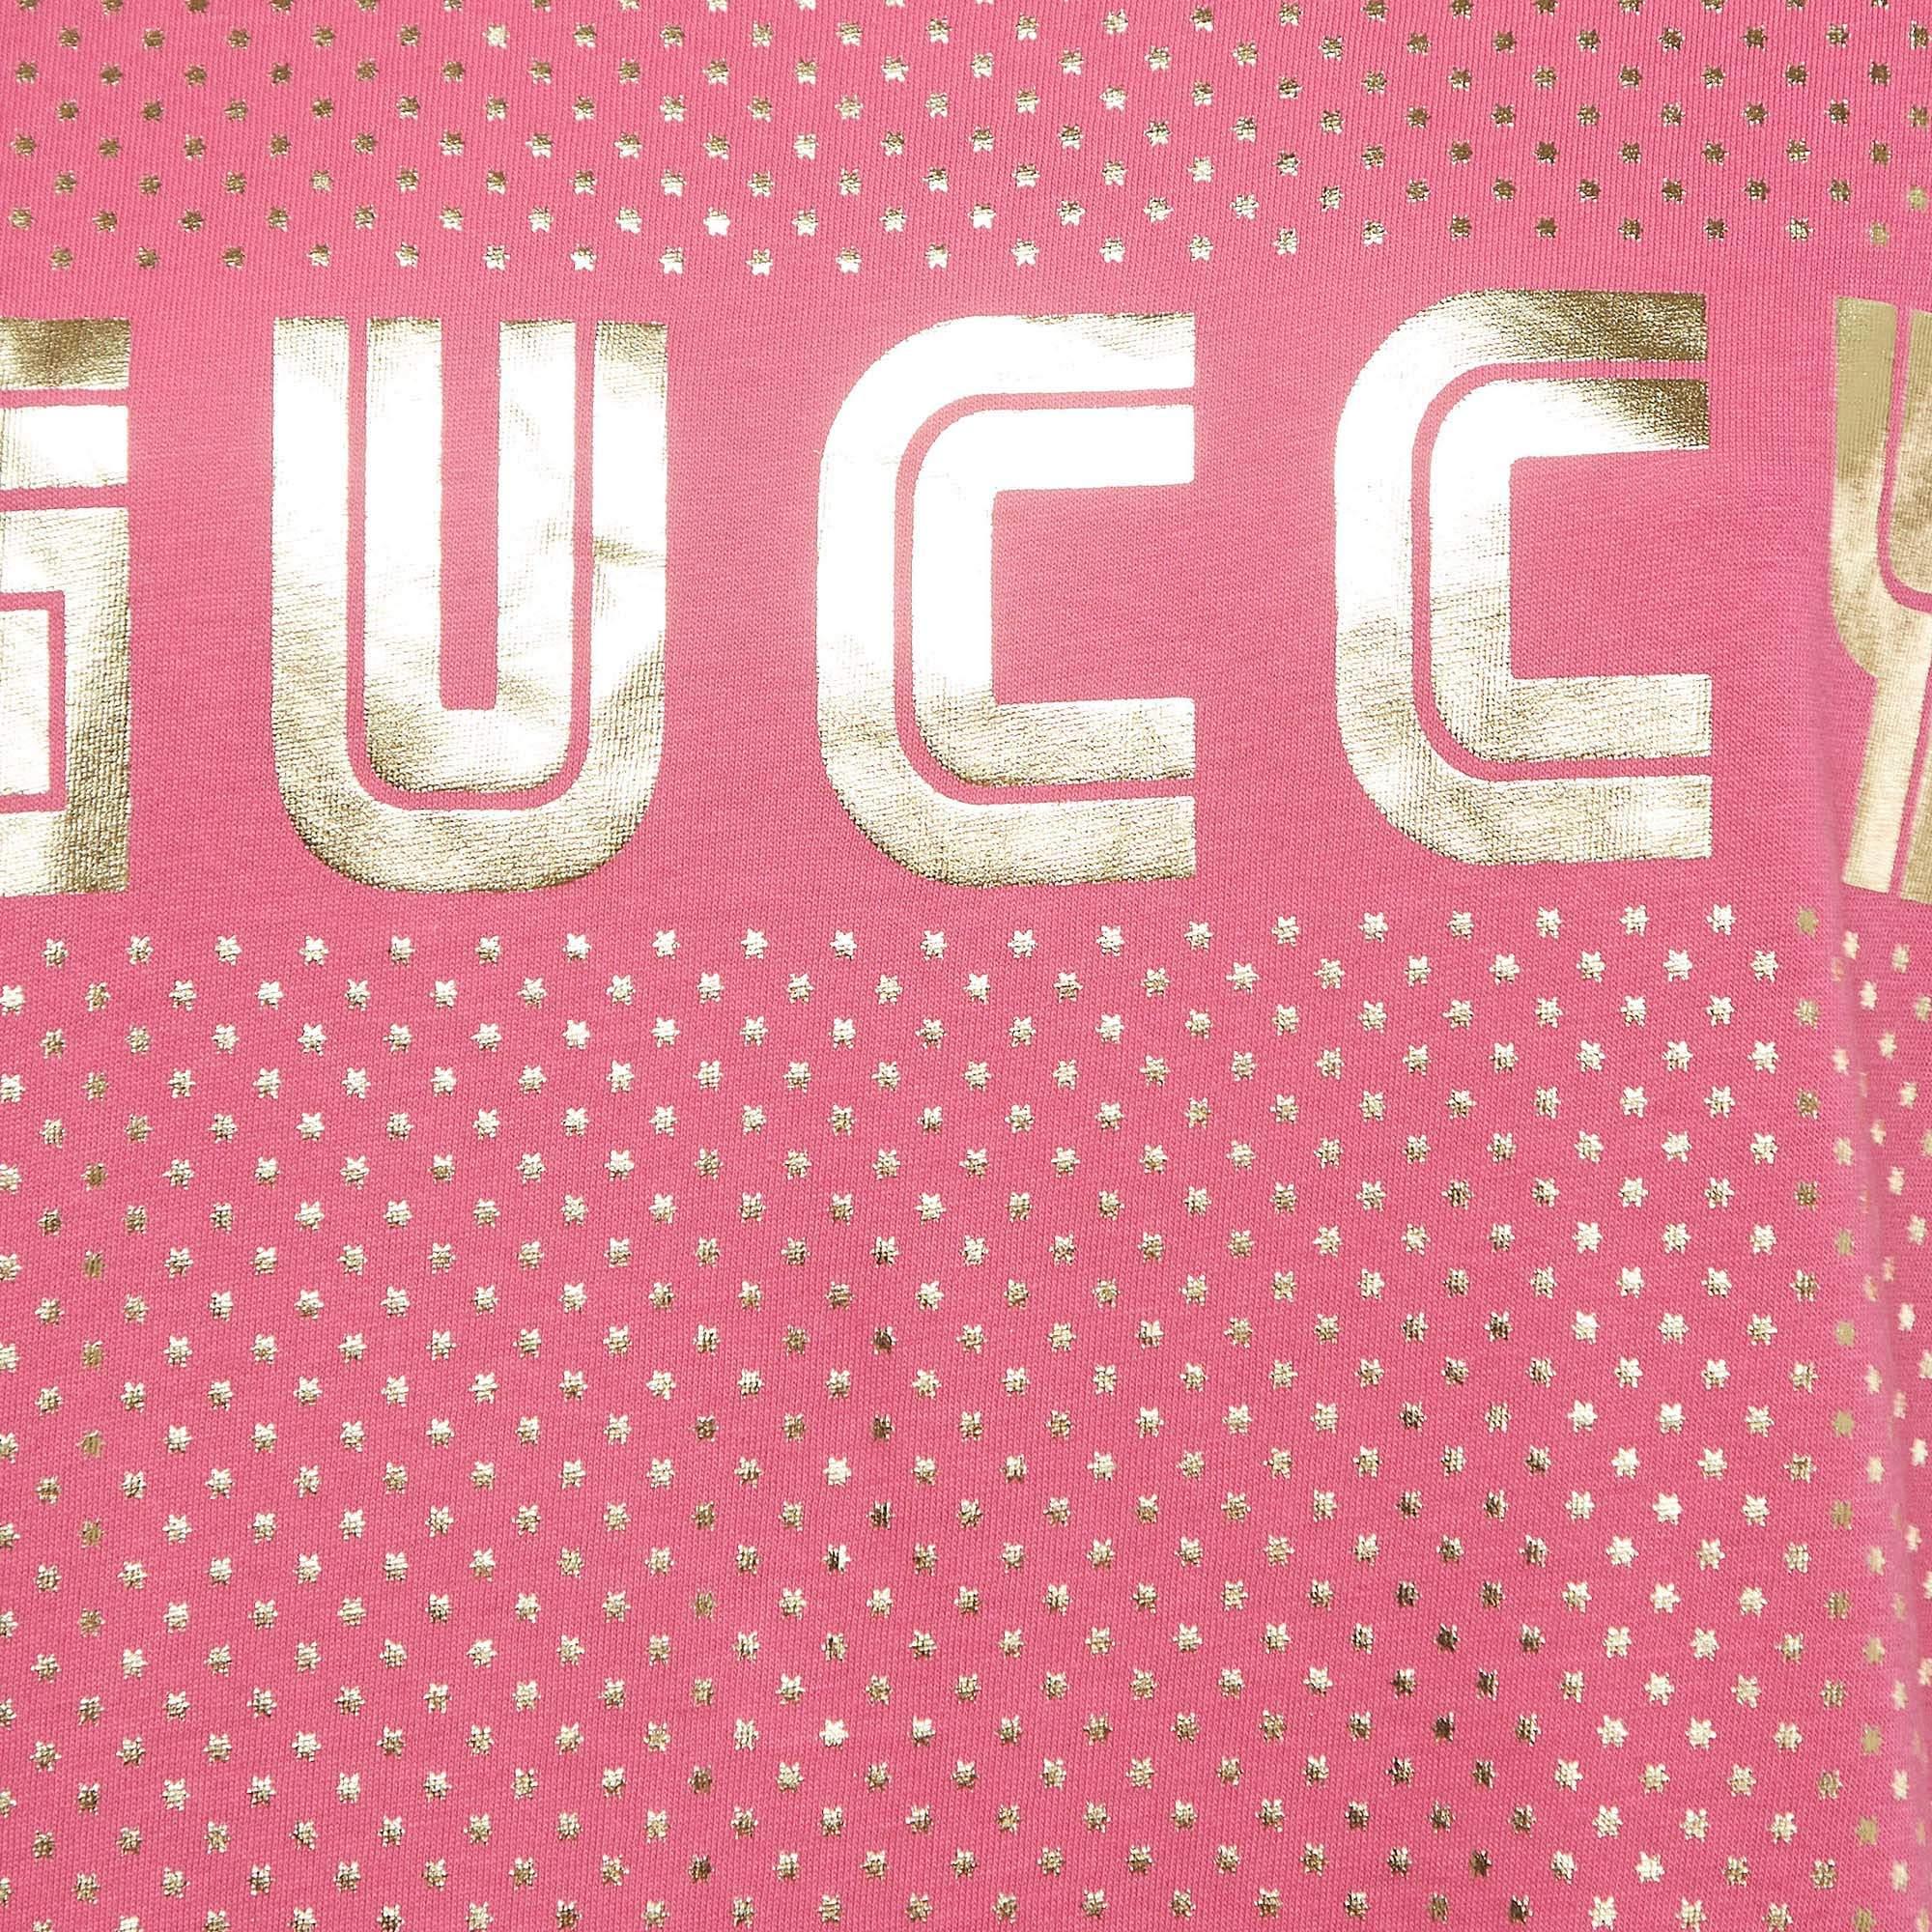 Gucci Pink Logo Printed Cotton Oversized T-Shirt S In Excellent Condition For Sale In Dubai, Al Qouz 2